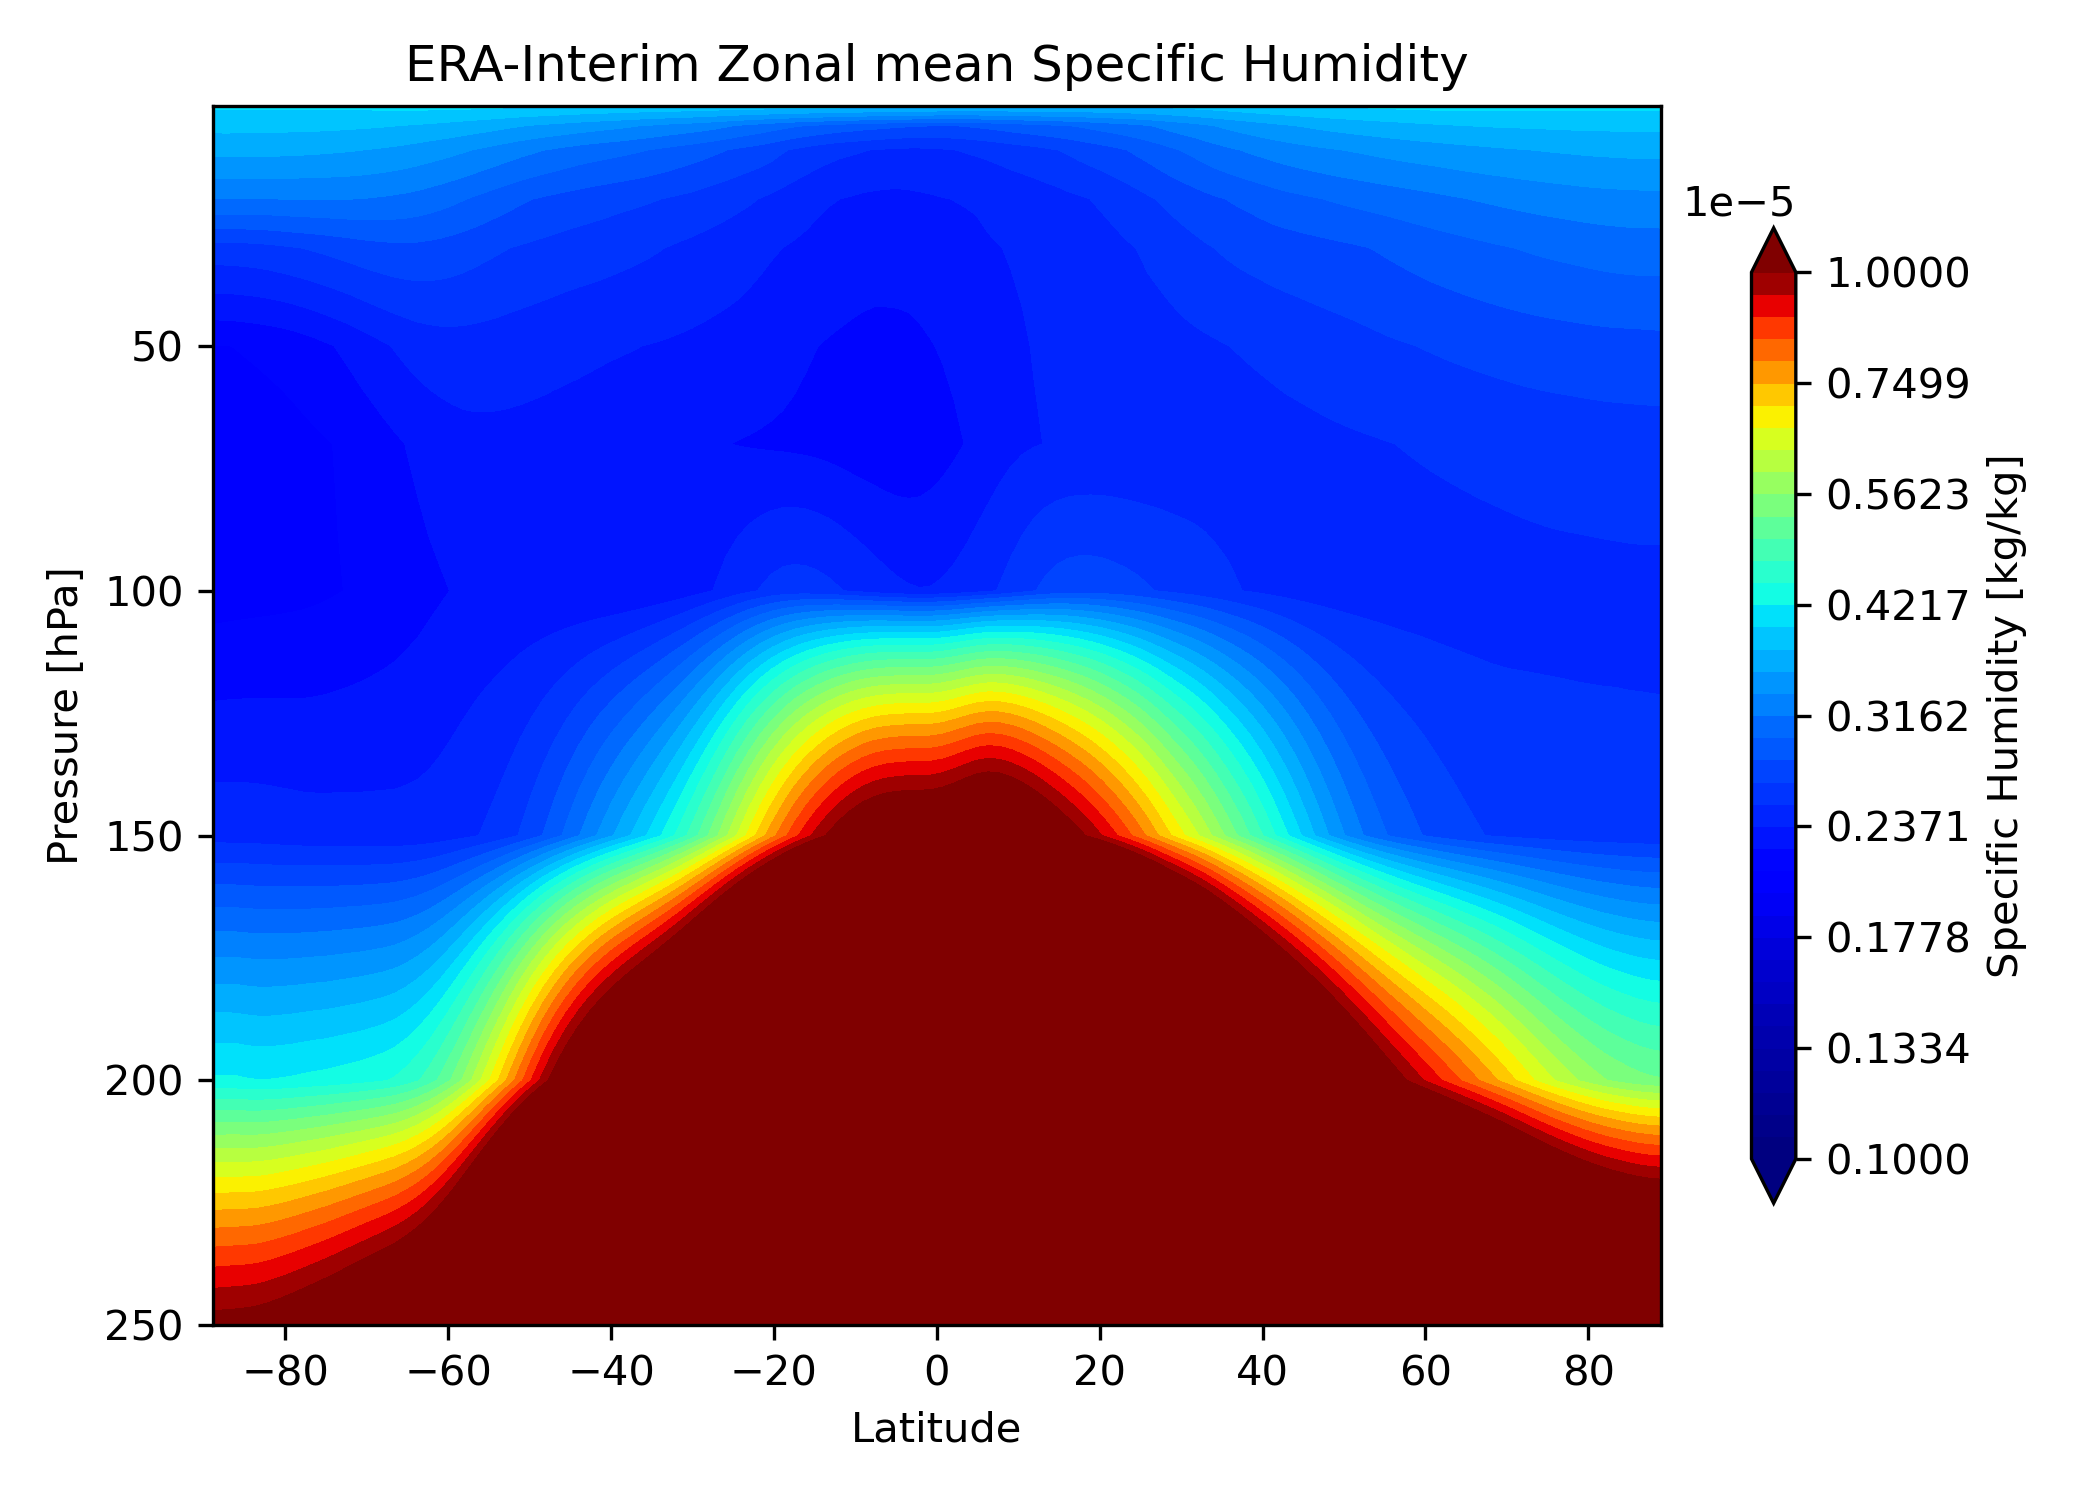 ../_images/fig_ERA-Interim_Zonal_mean_Specific_Humidity.png